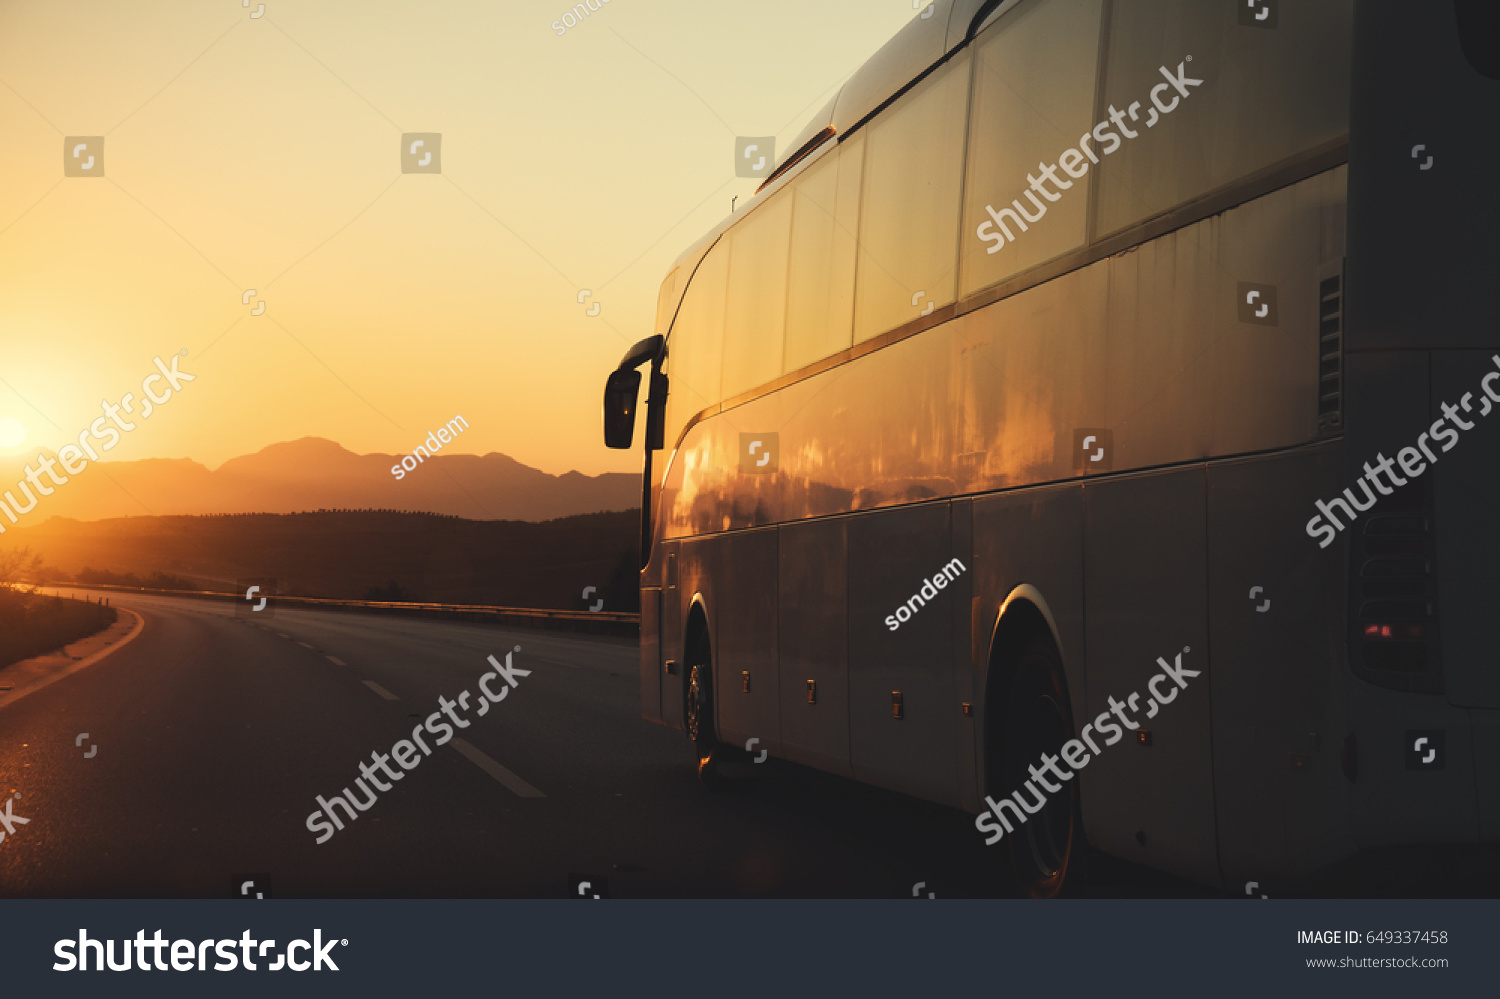 White bus driving on road towards the setting sun #649337458